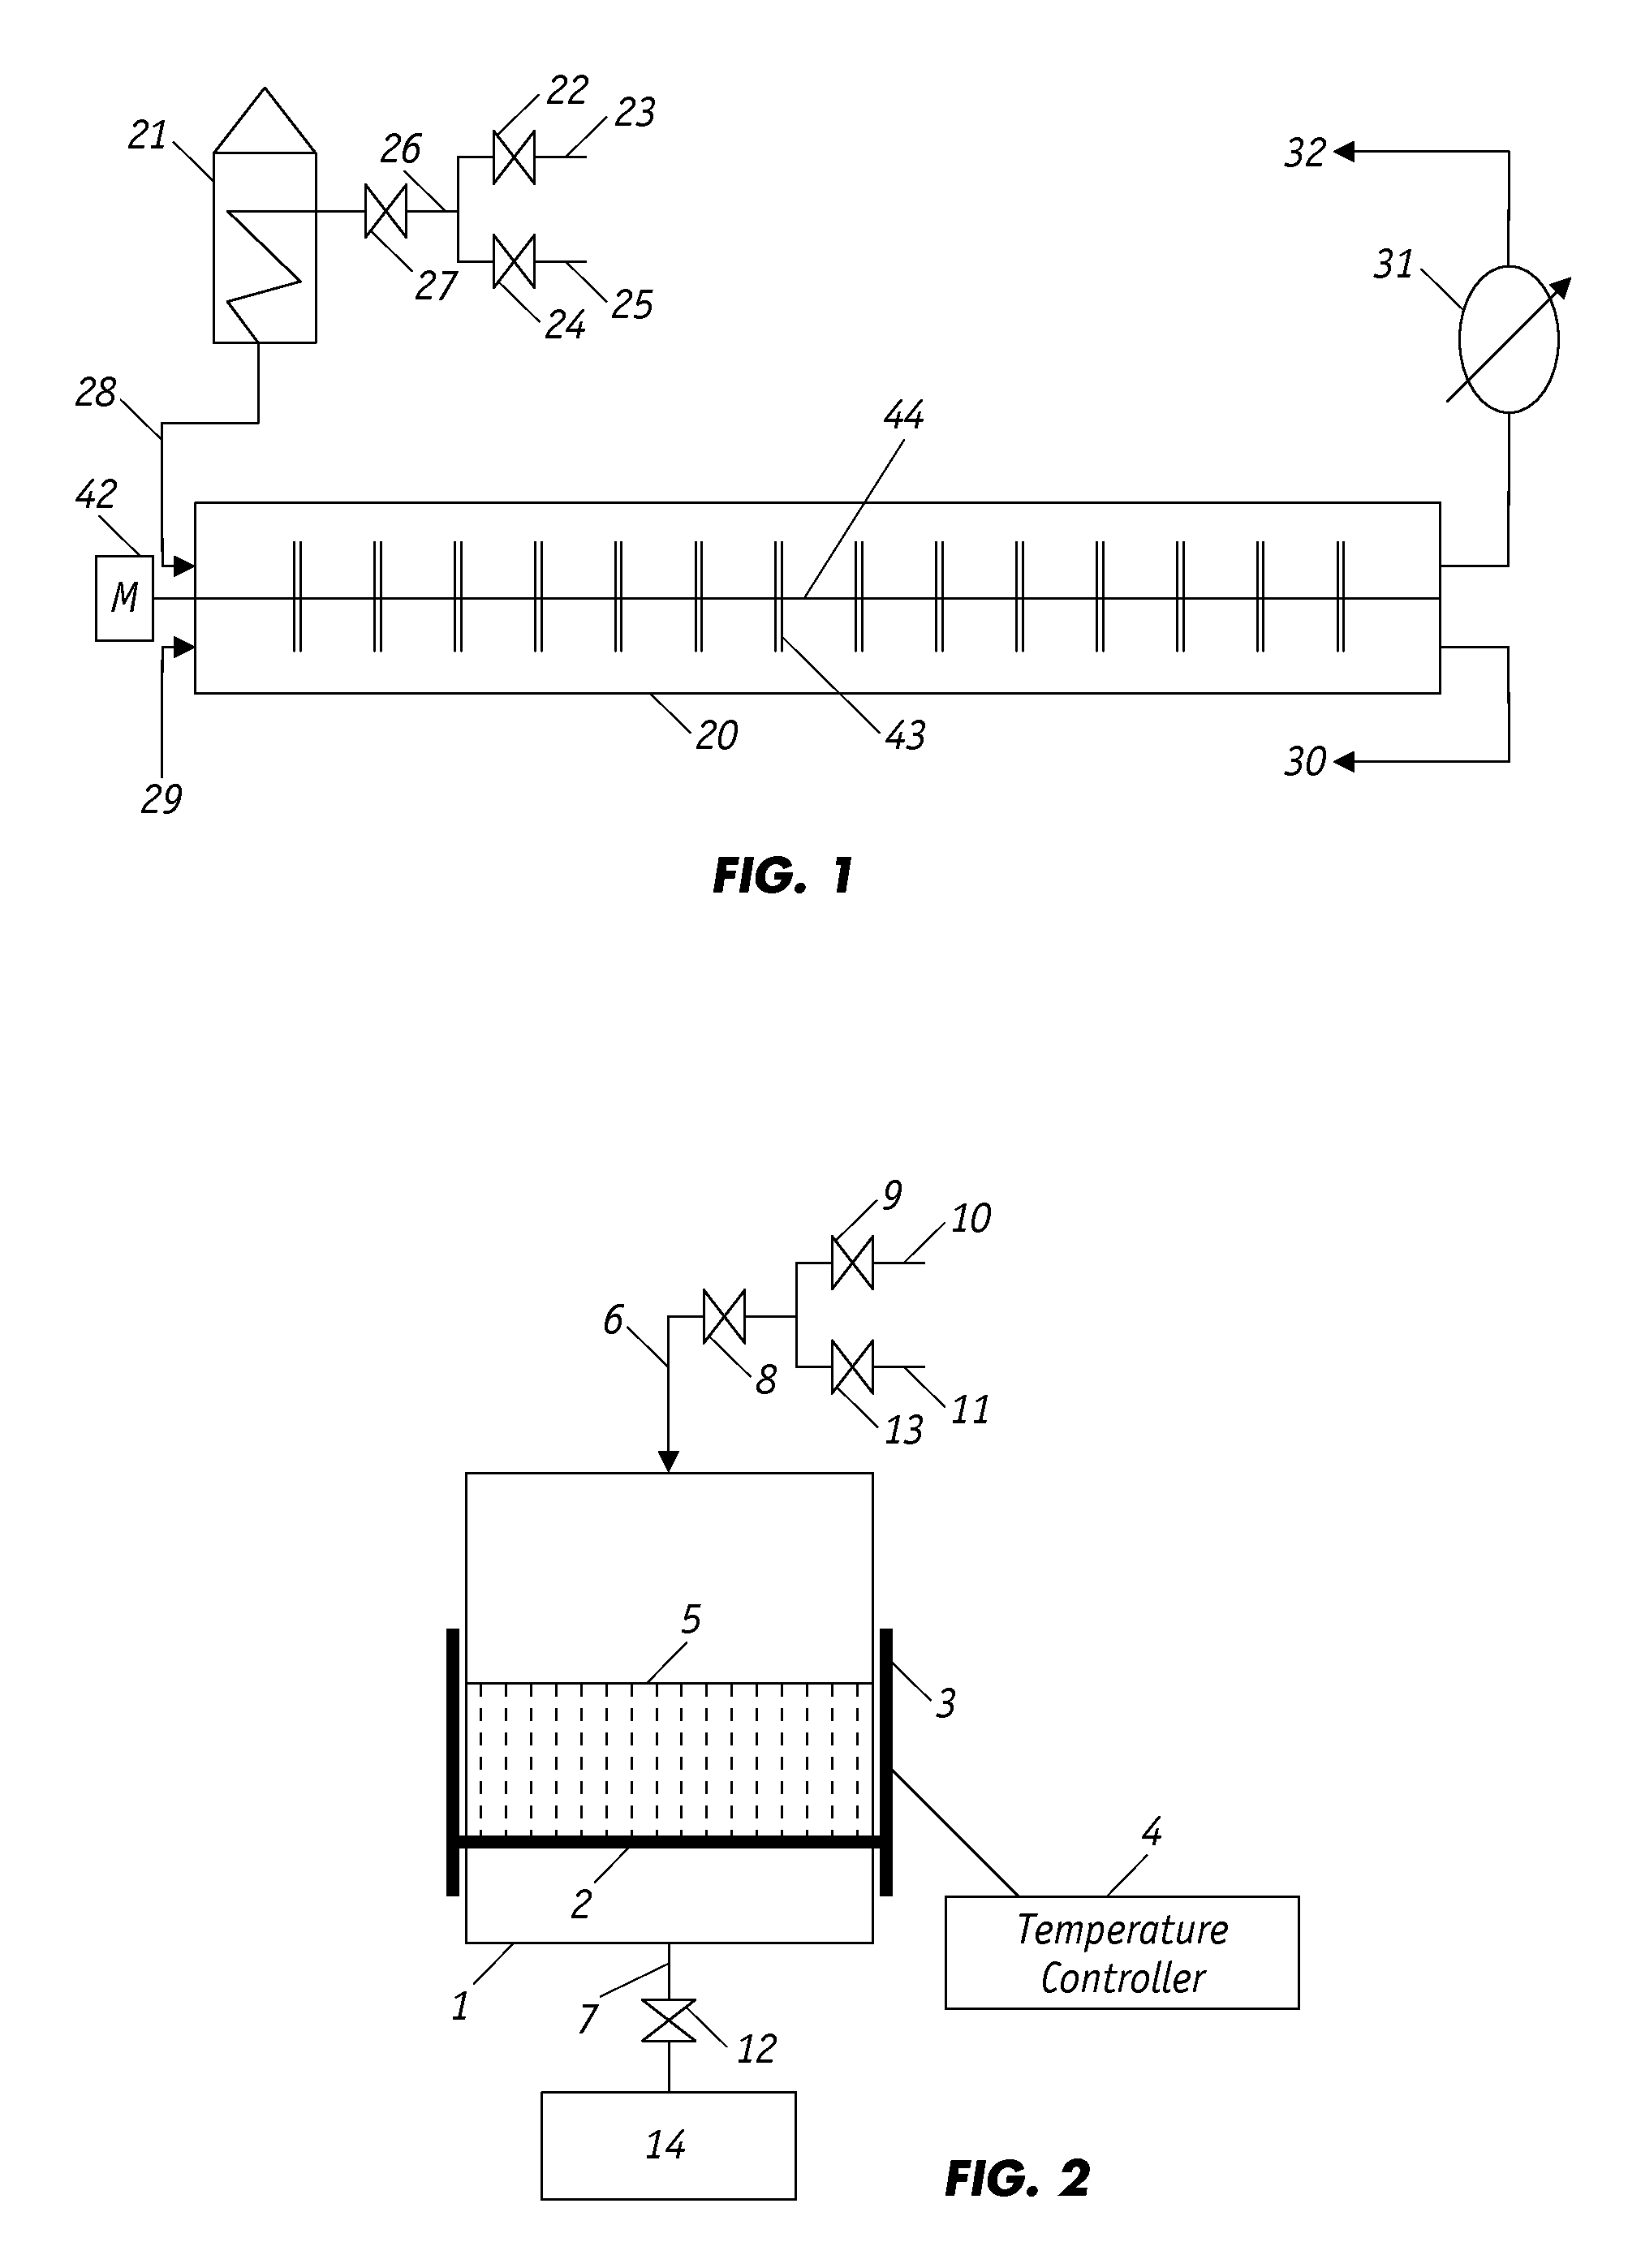 Method for producing rubberized concrete using waste rubber tires